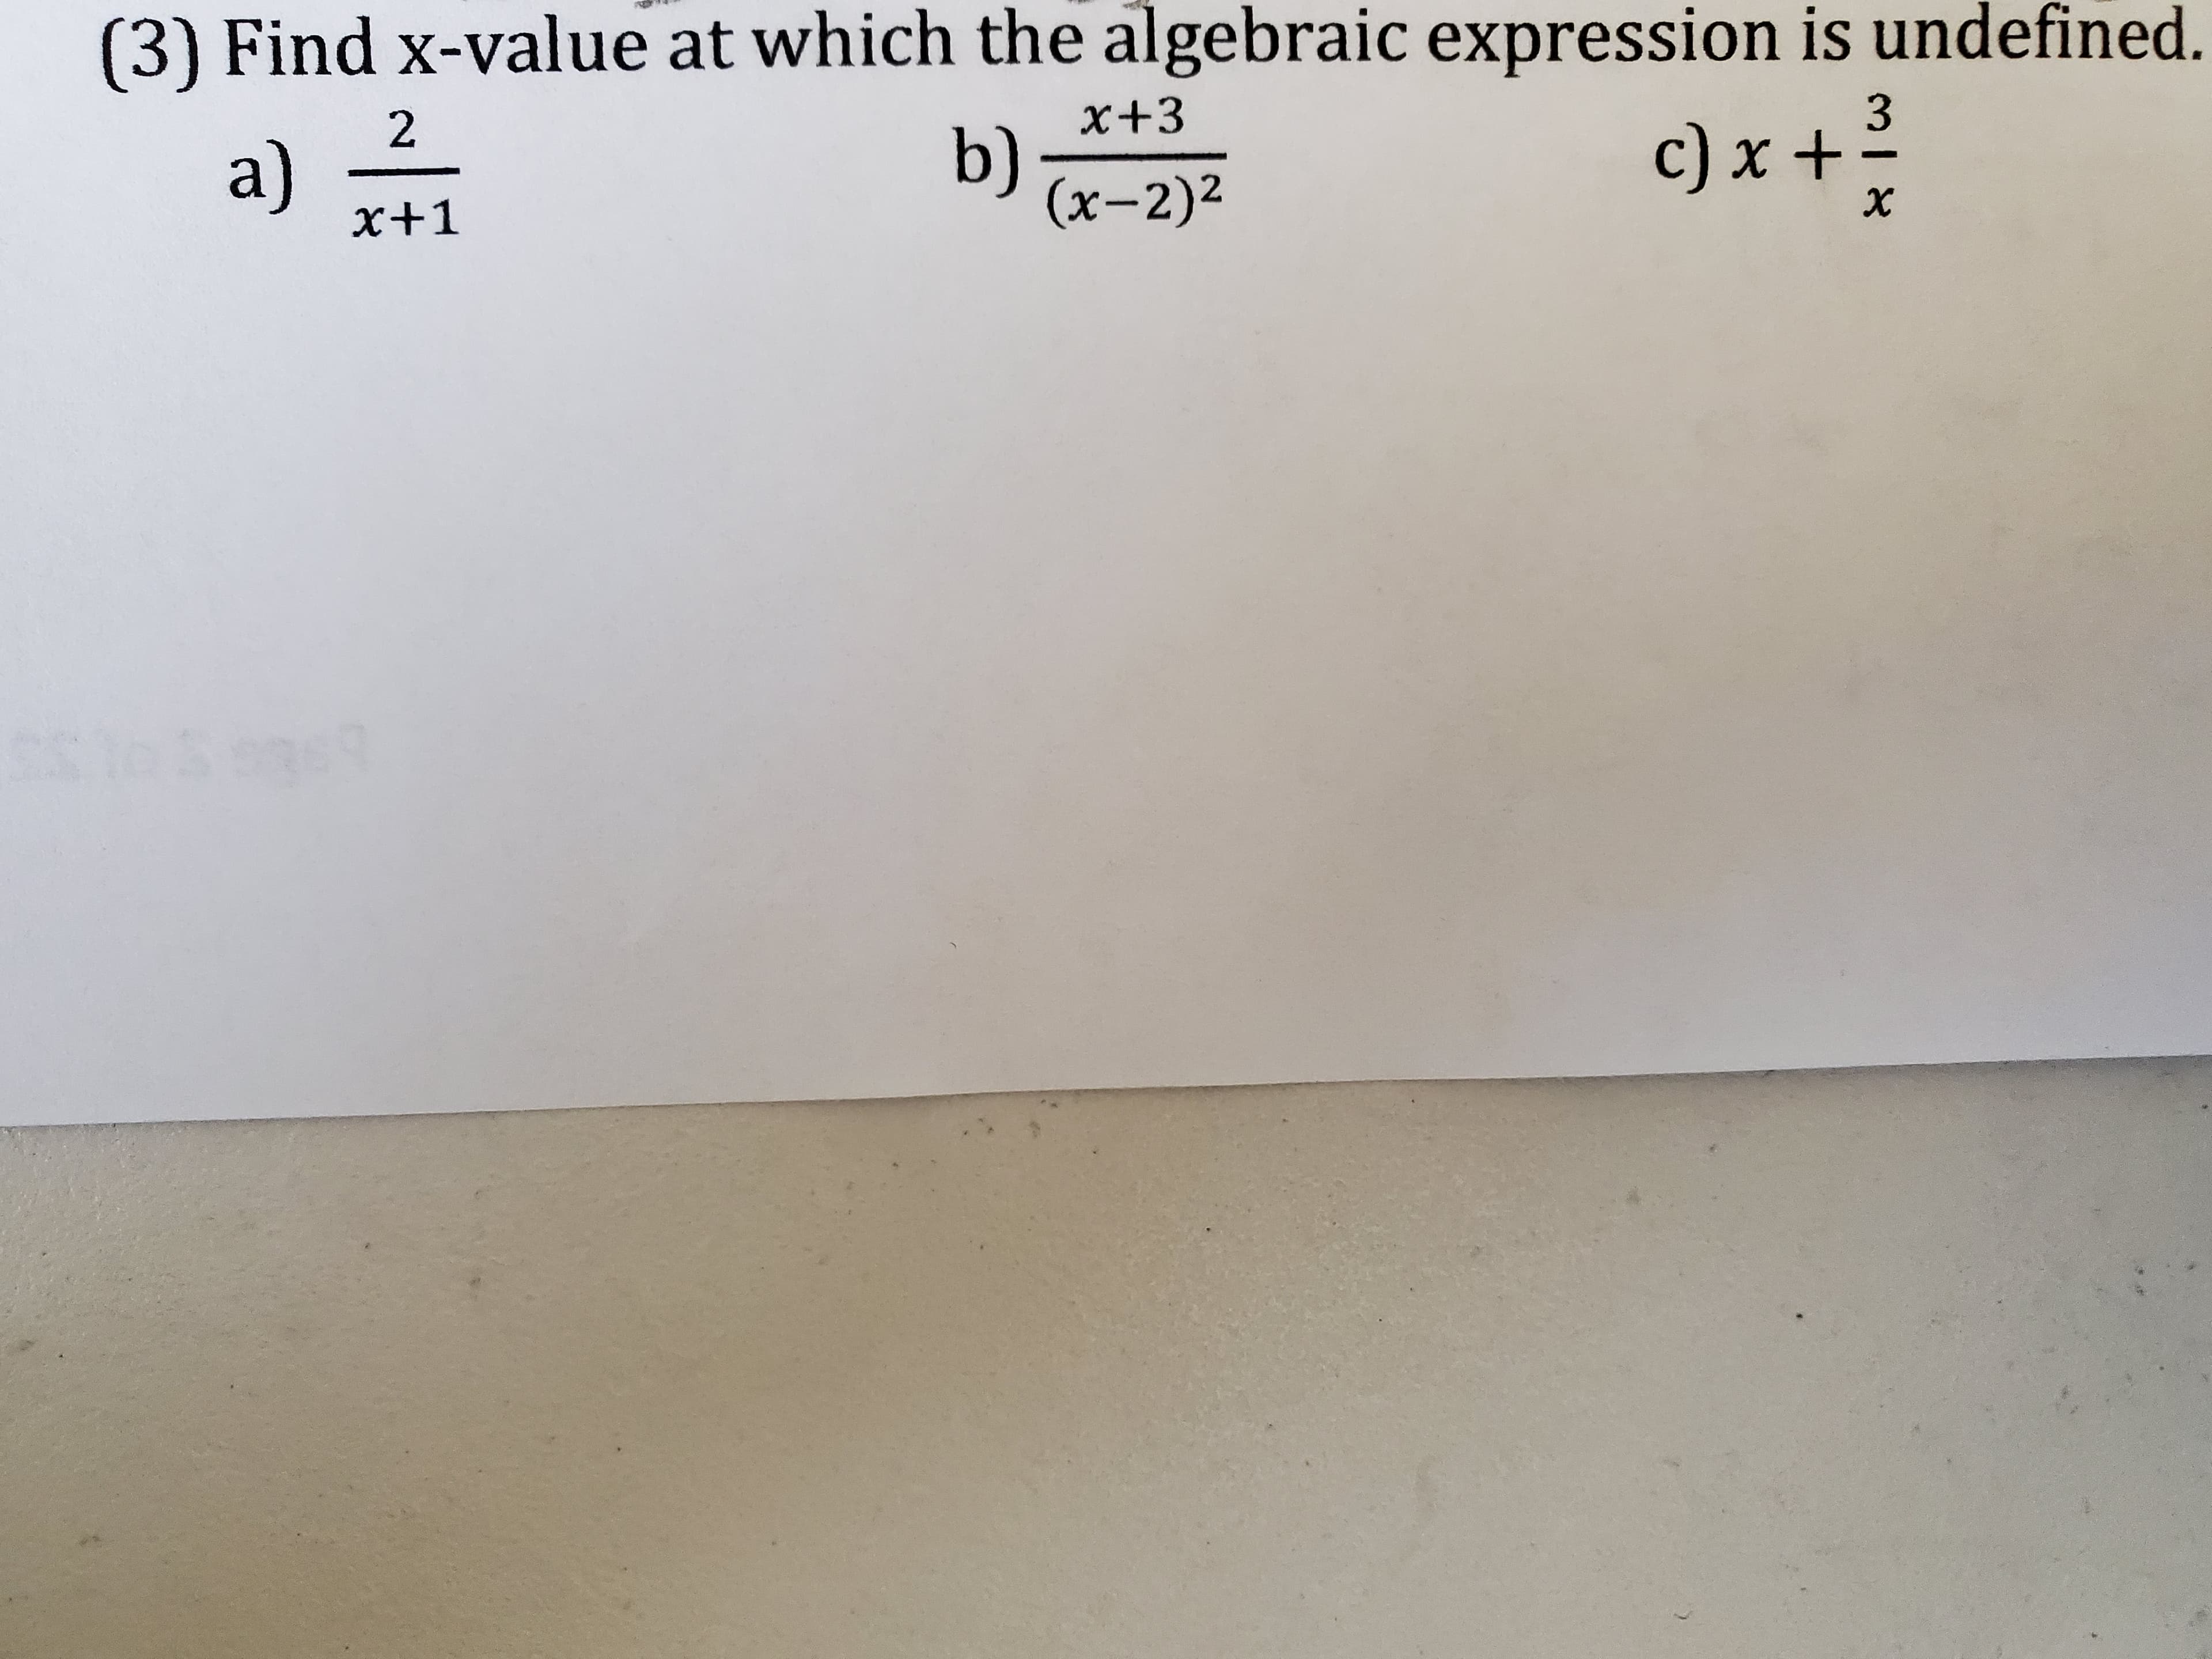 (3) Find x-value at which the algebraic expression is undefined.
c) x +
2
x+3
3
a)
(x-2)2
х+1
